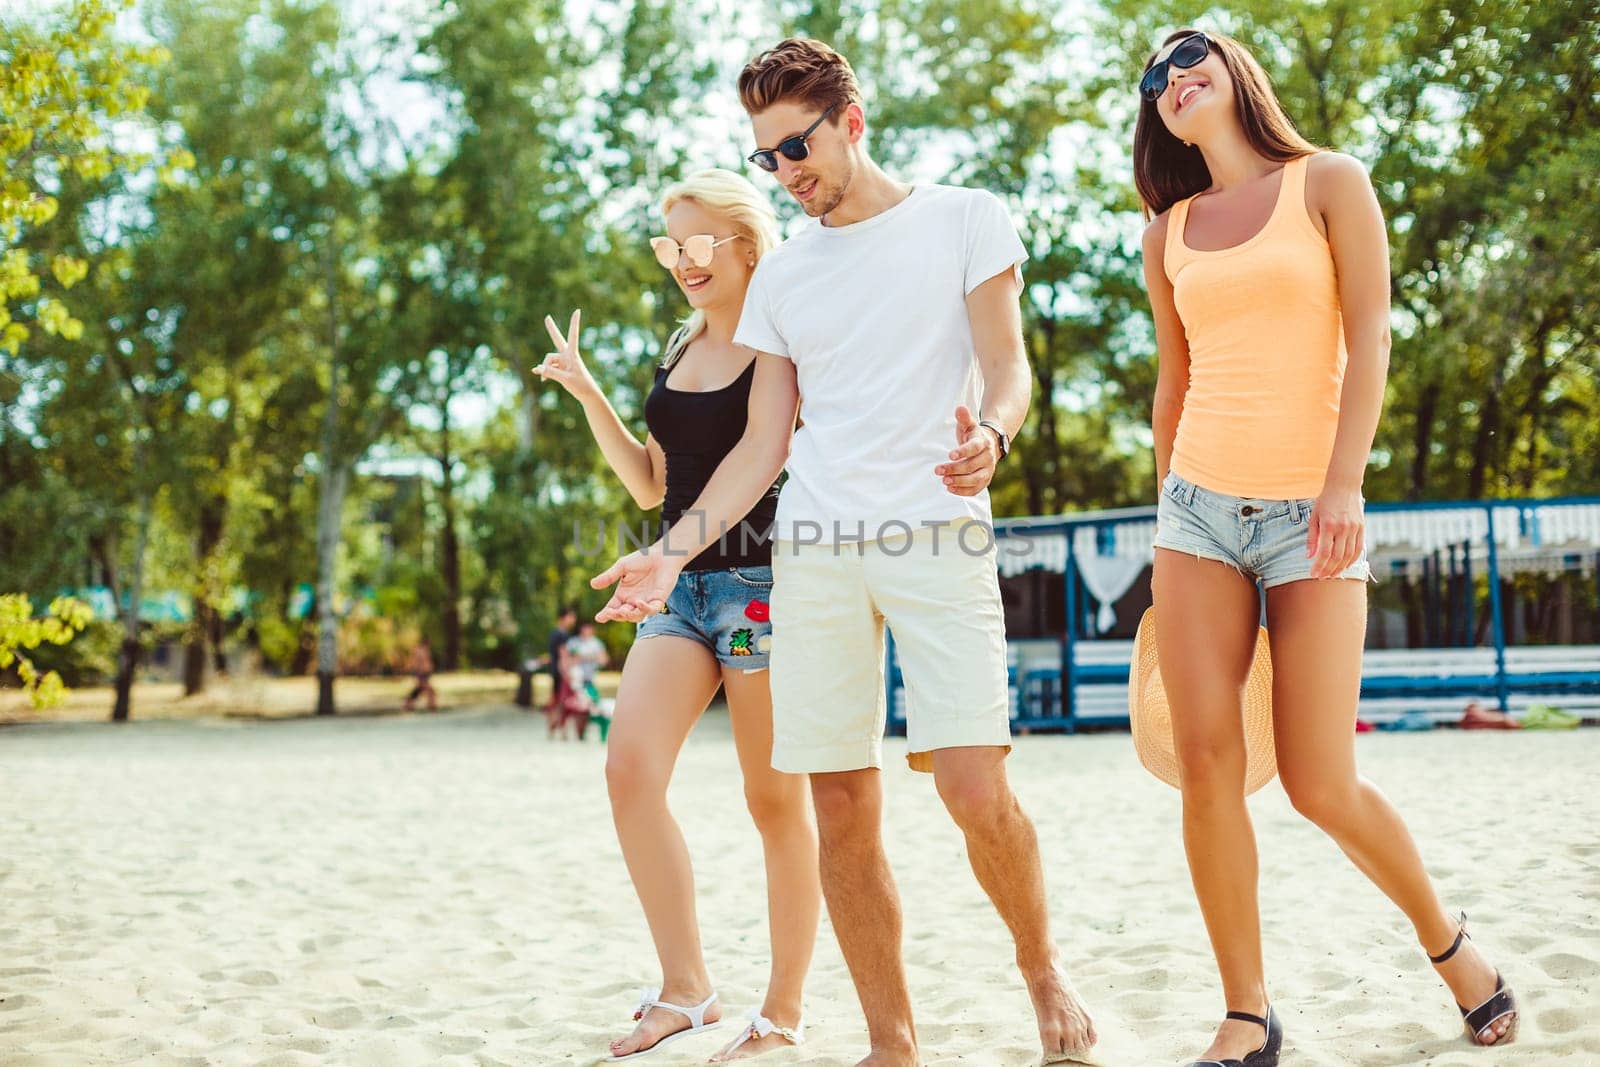 Young funny guys in sunglasses on the beach. Friends together. Summer bar is on background.